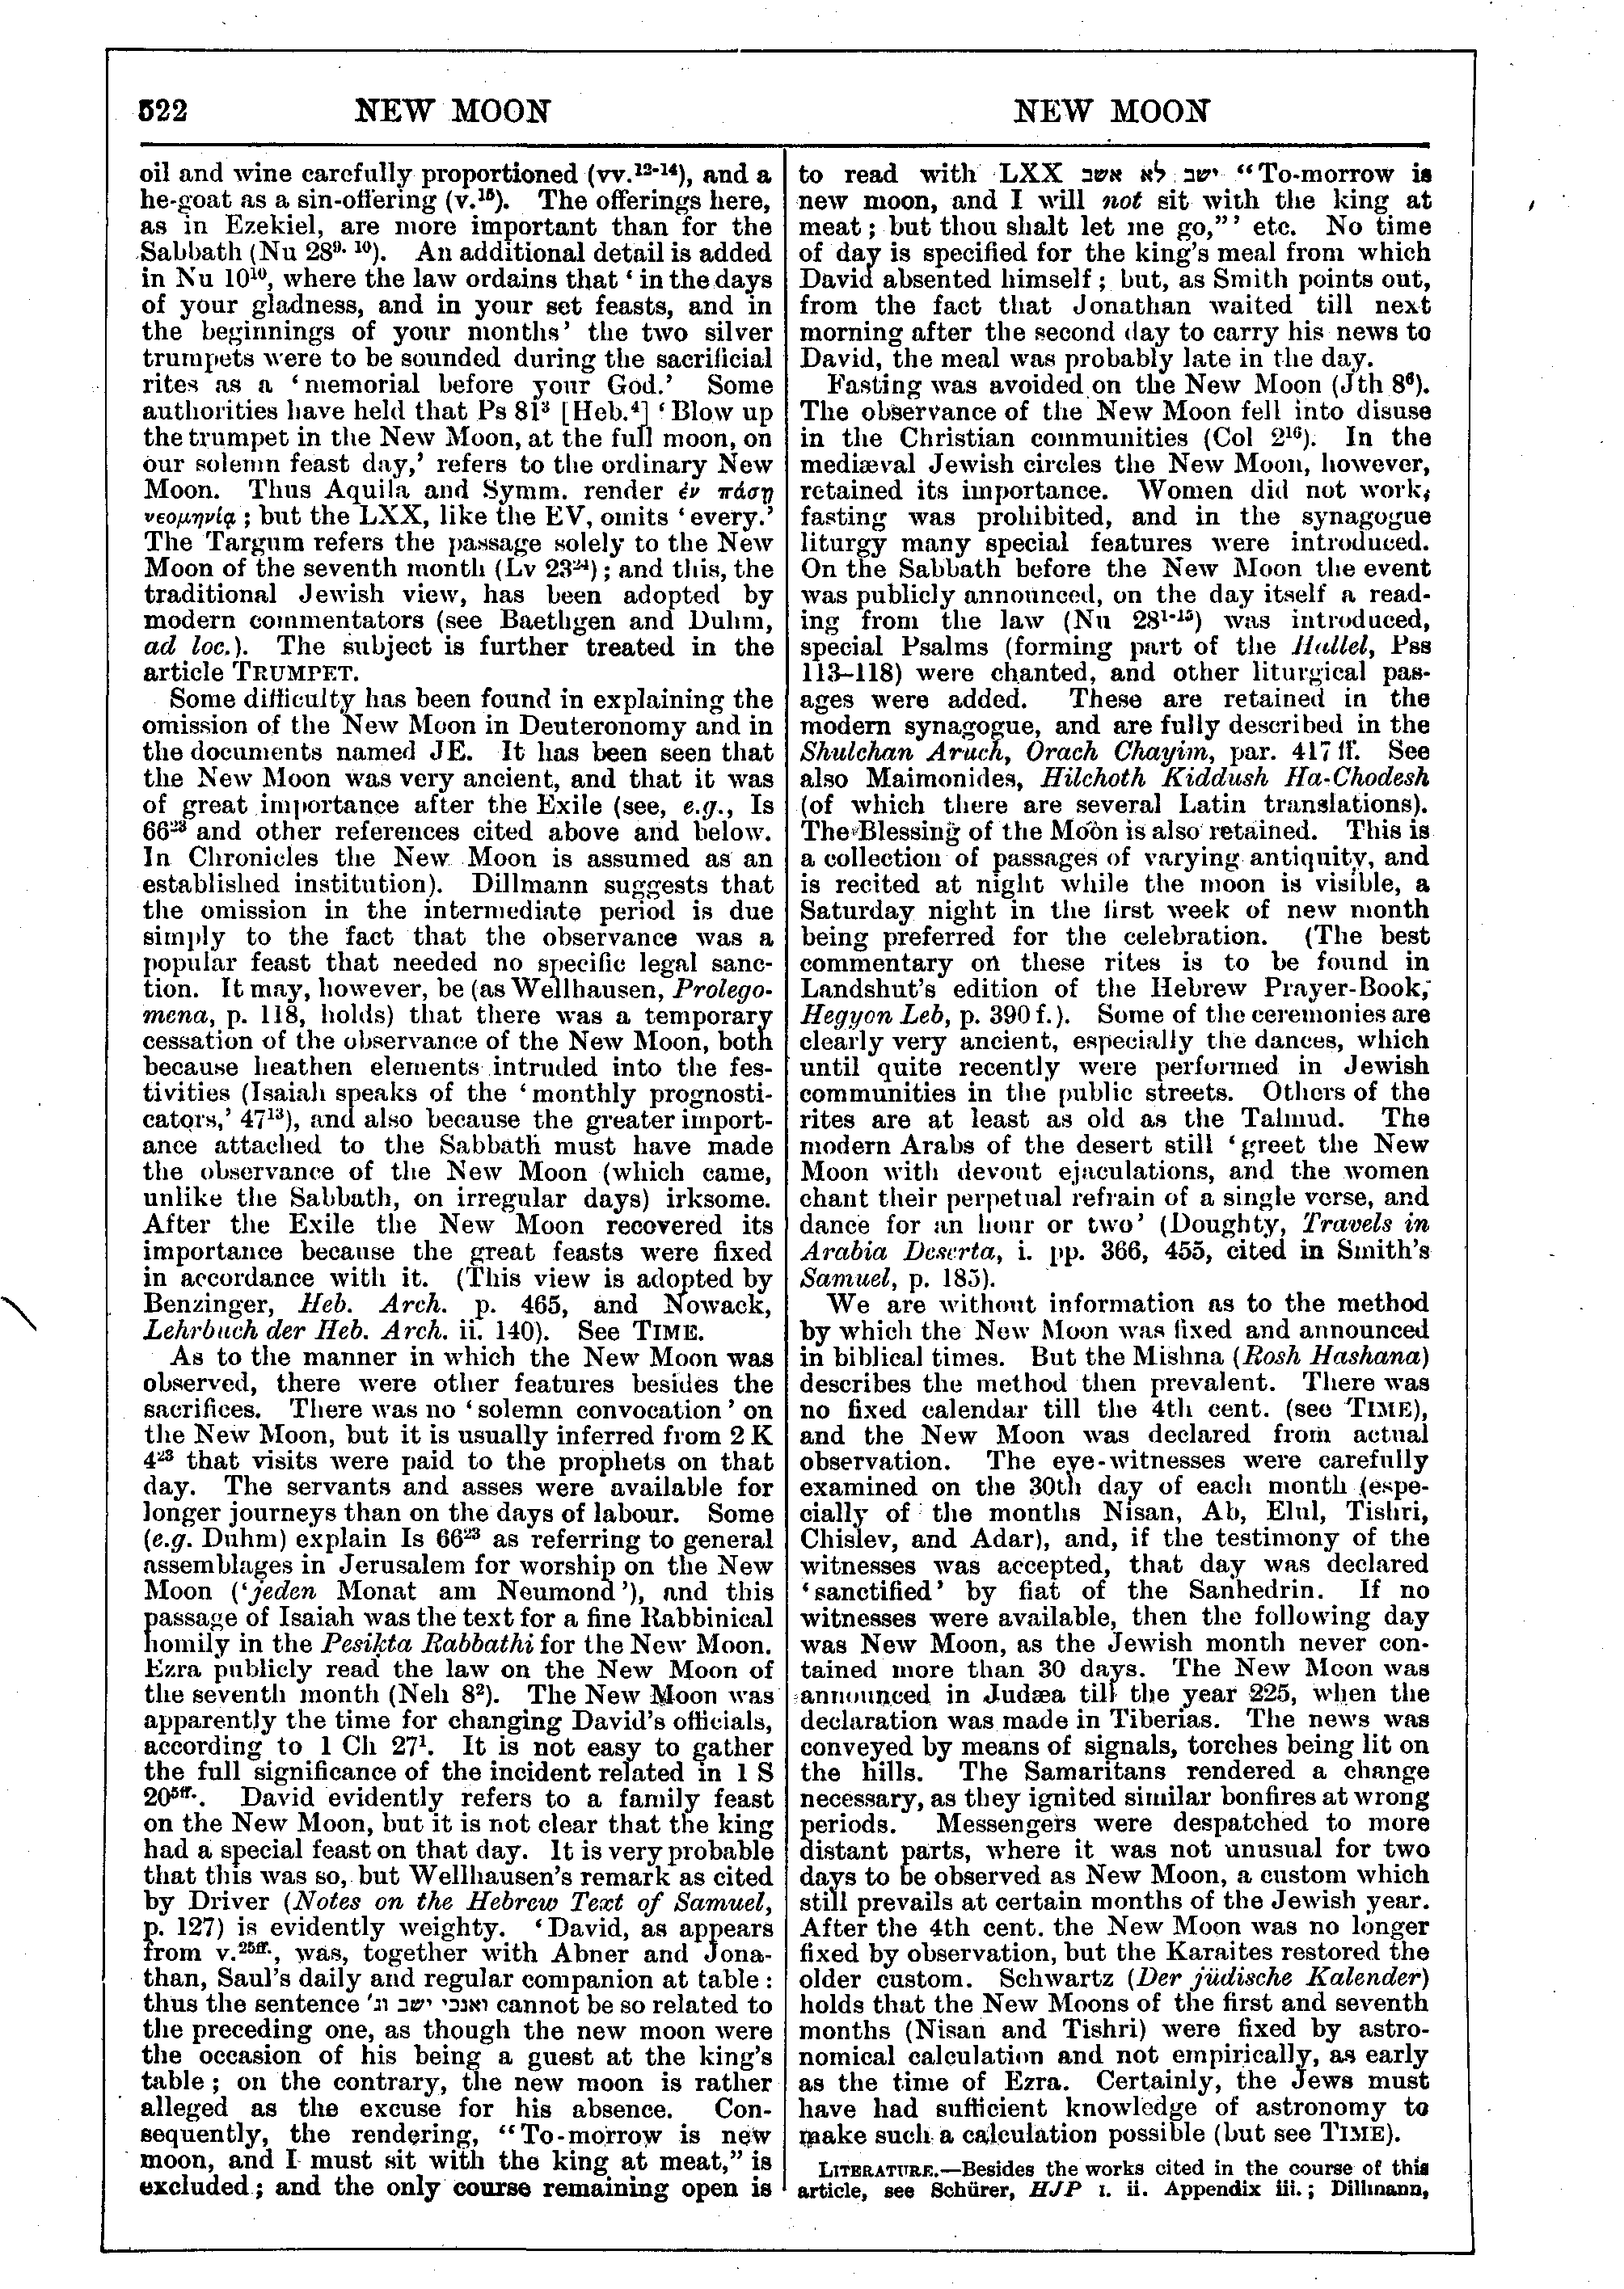 Image of page 522